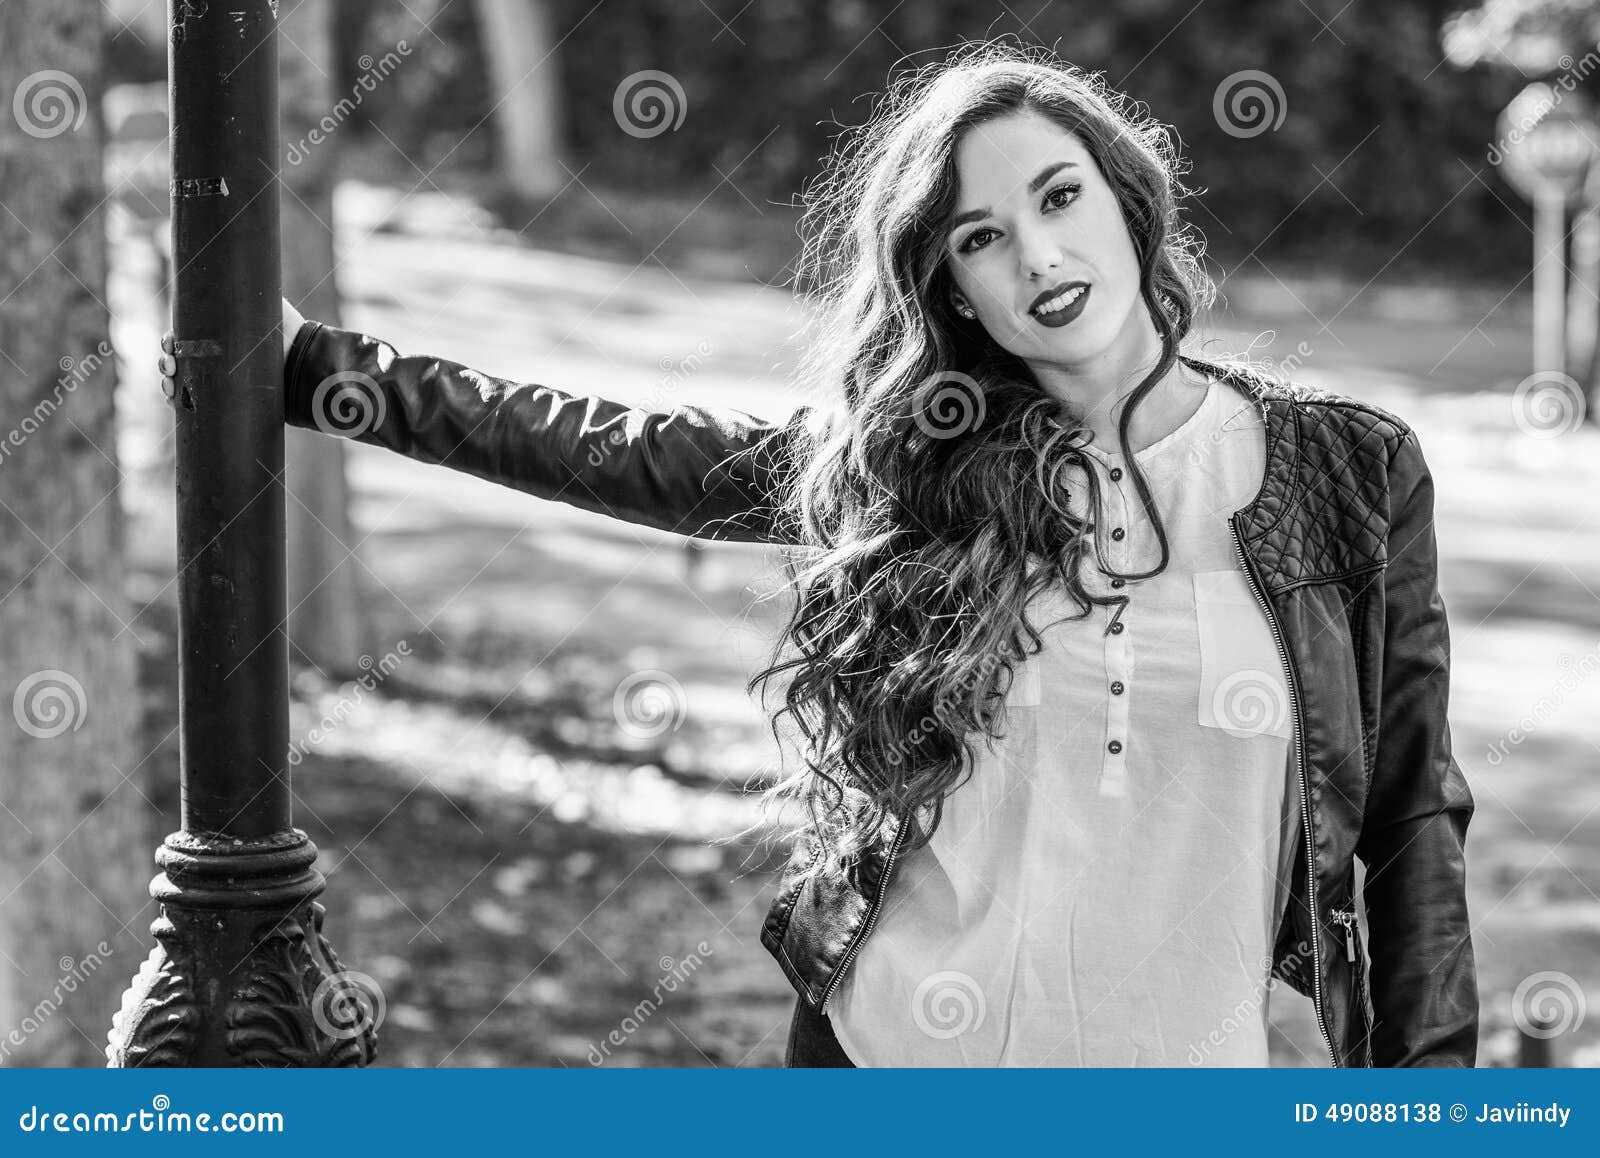 Girl with Long Hair Wearing Leather Jacket Stock Photo - Image of ...